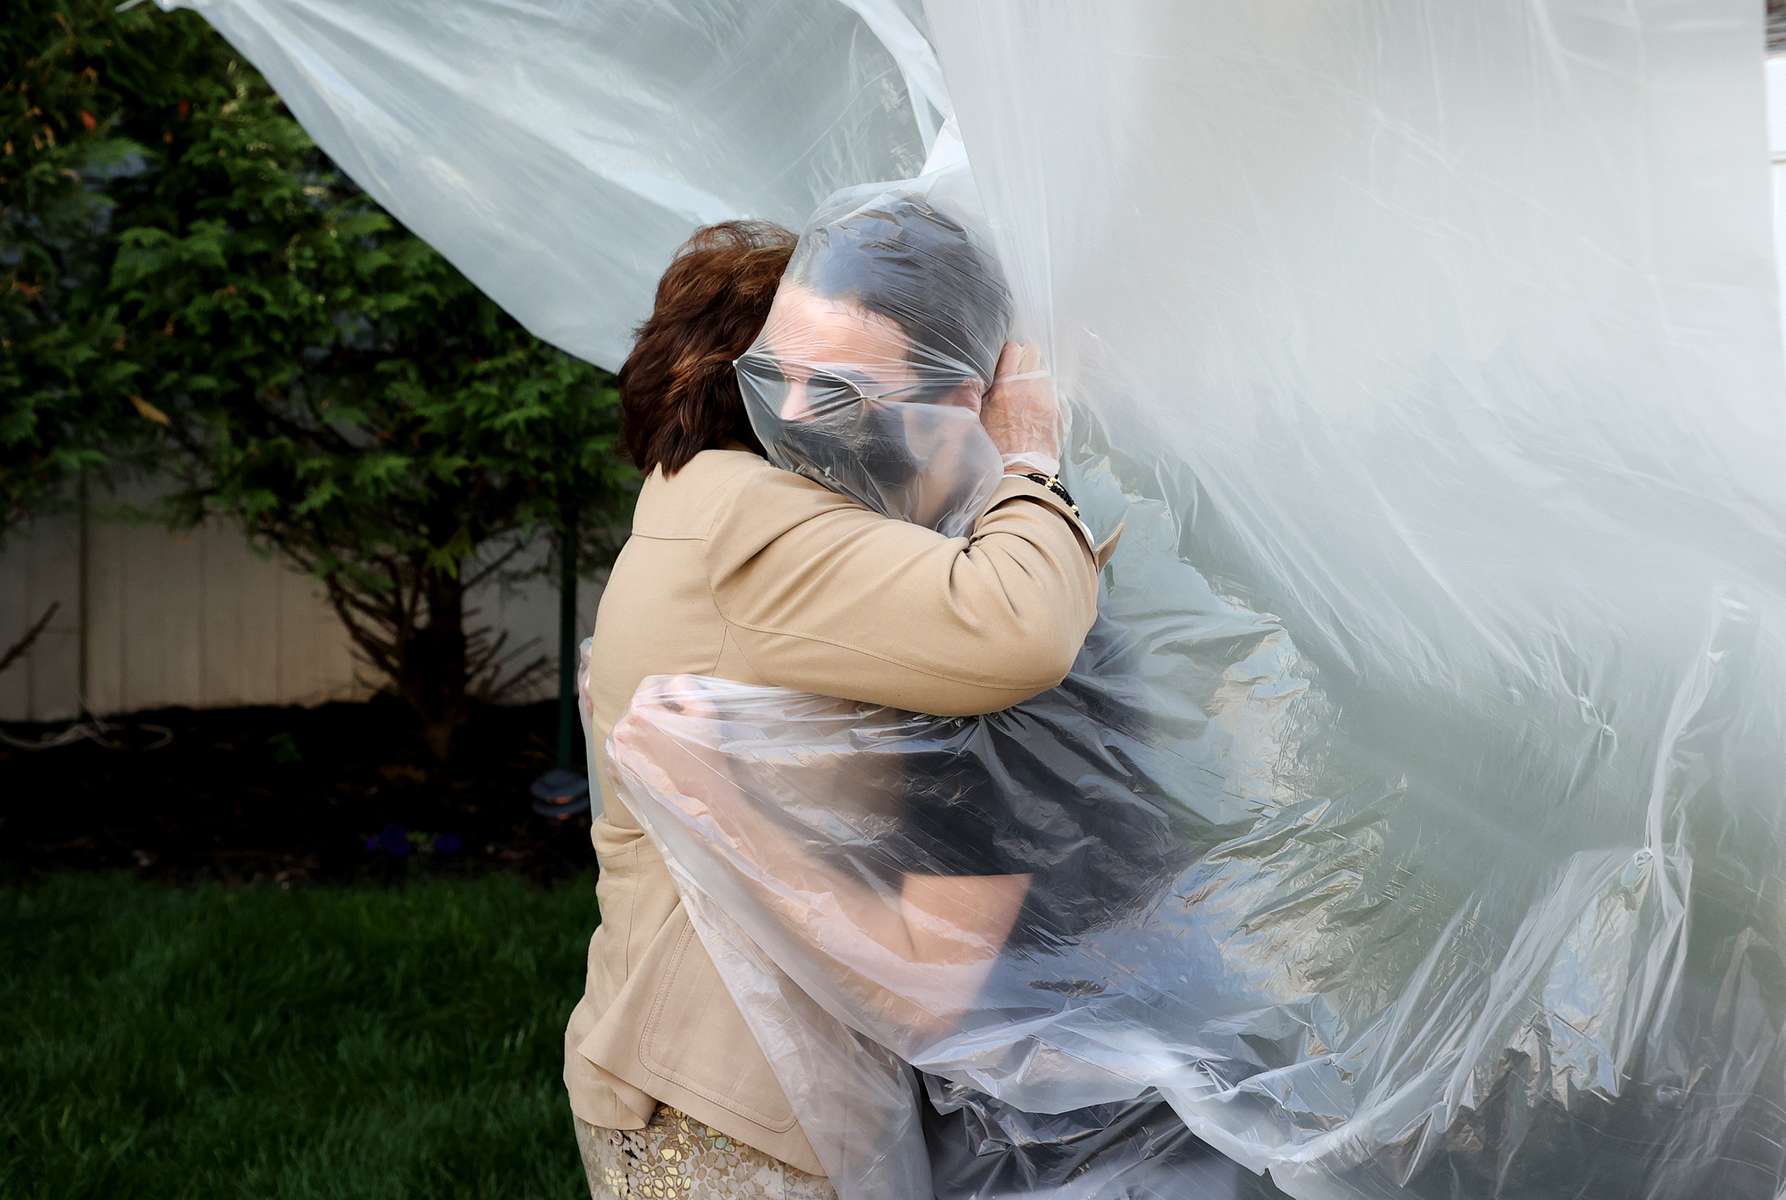 James Grant hugs his Grandmother Mary Grace Sileo through a plastic drop cloth hung up on a homemade clothes line during Memorial Day Weekend on May 24, 2020 in Wantagh, New York.  It is the first time they have had contact of any kind since the coronavirus COVID-19 pandemic lockdown started in late February.  